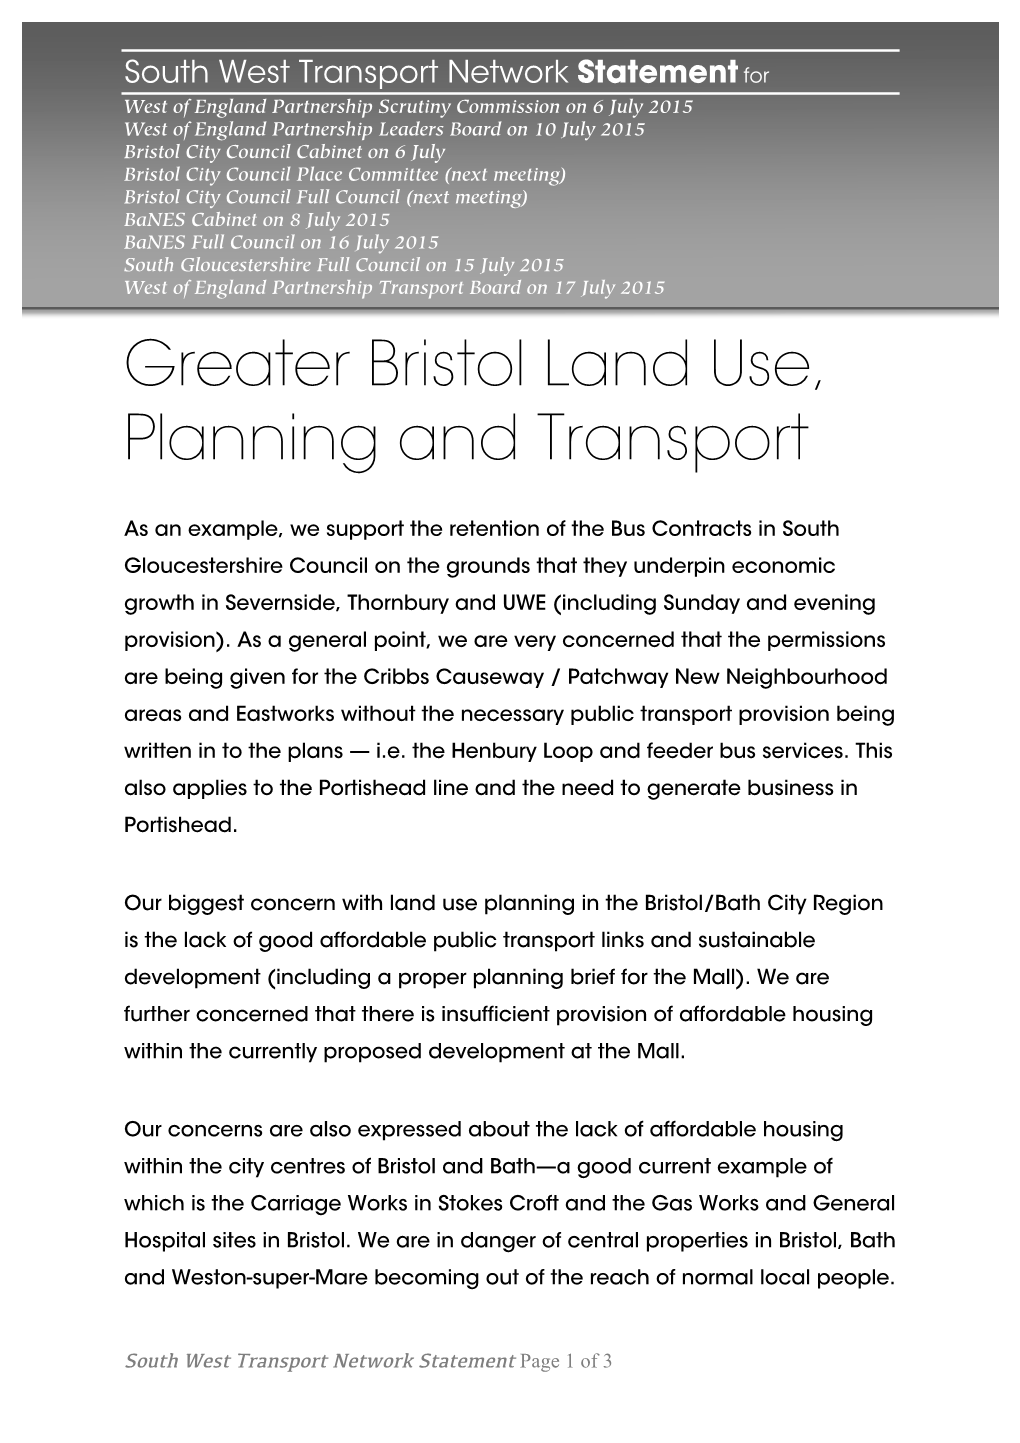 Greater Bristol Land Use, Planning and Transport